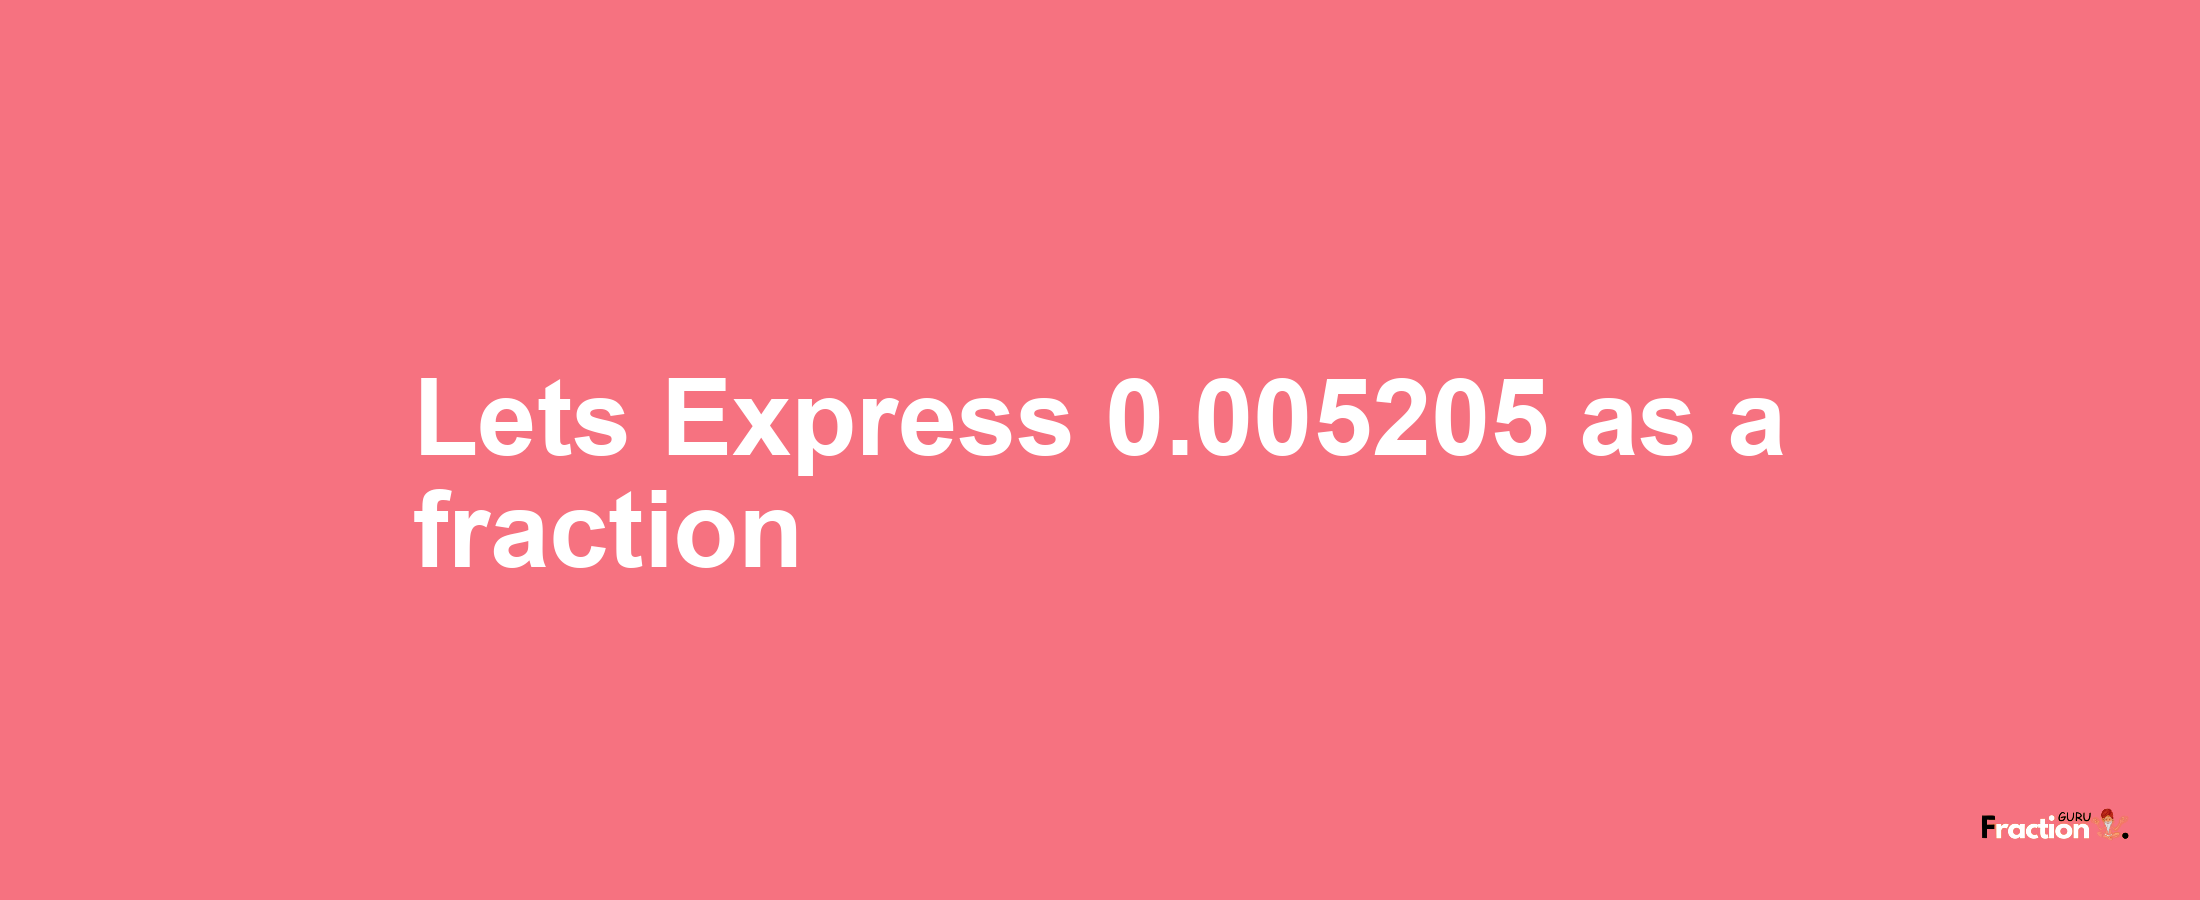 Lets Express 0.005205 as afraction